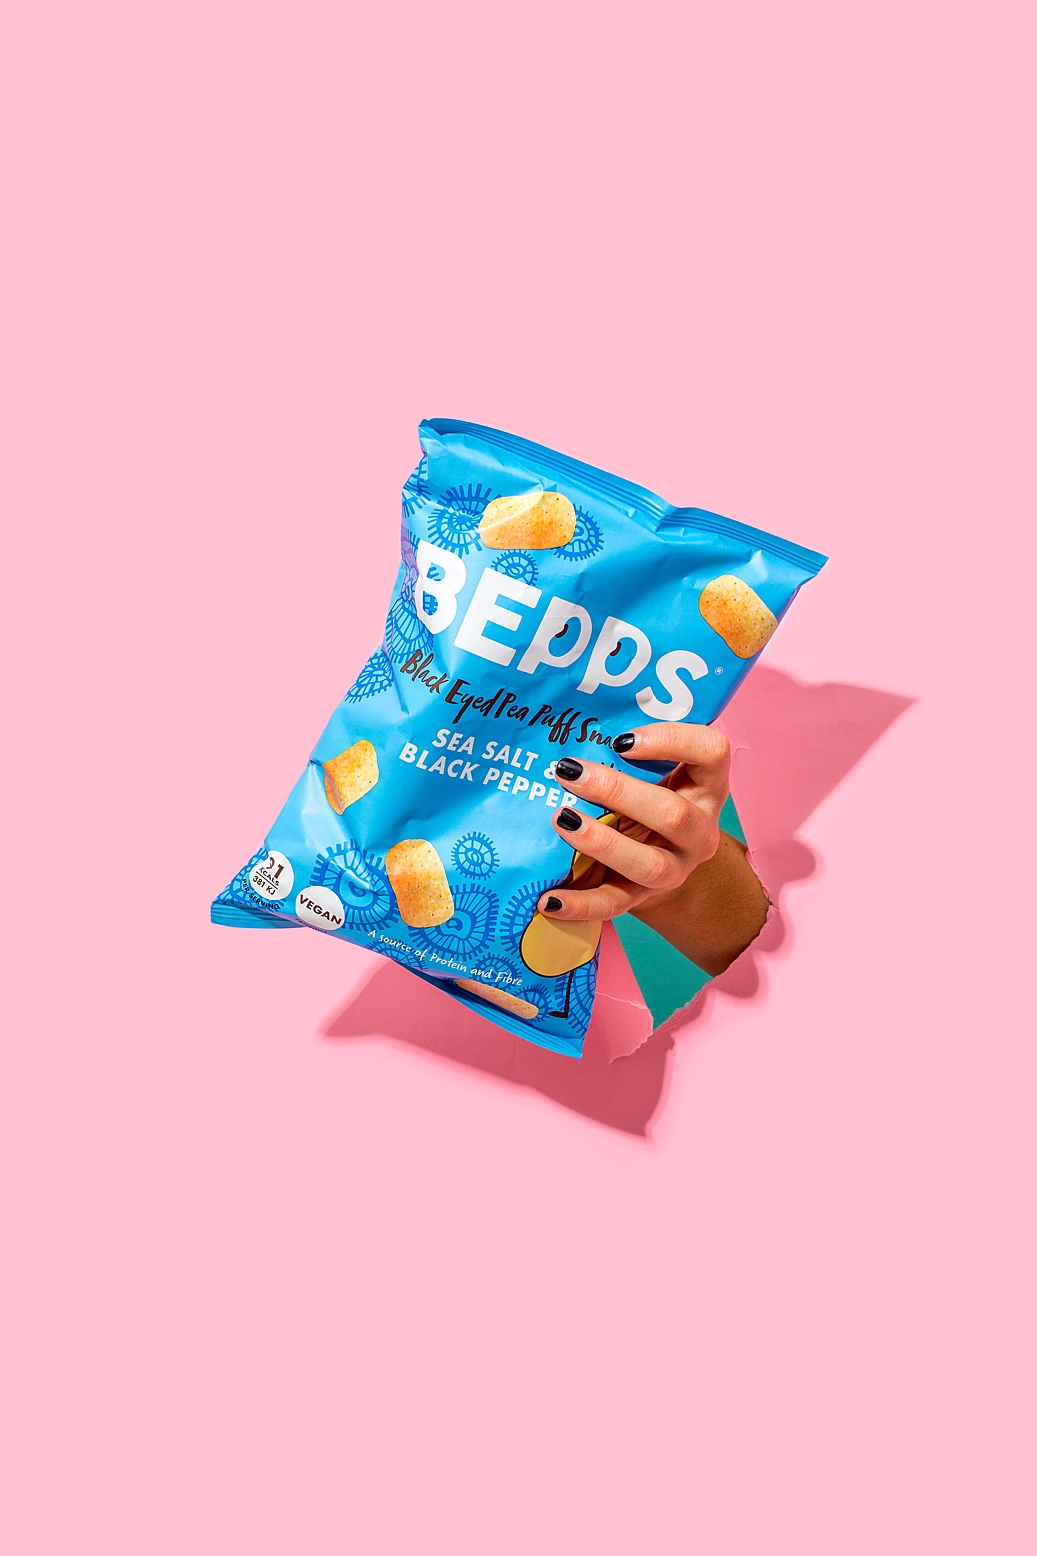 Colourful product photography and content creation for Bepps vegan snacks by Marianne Taylor.